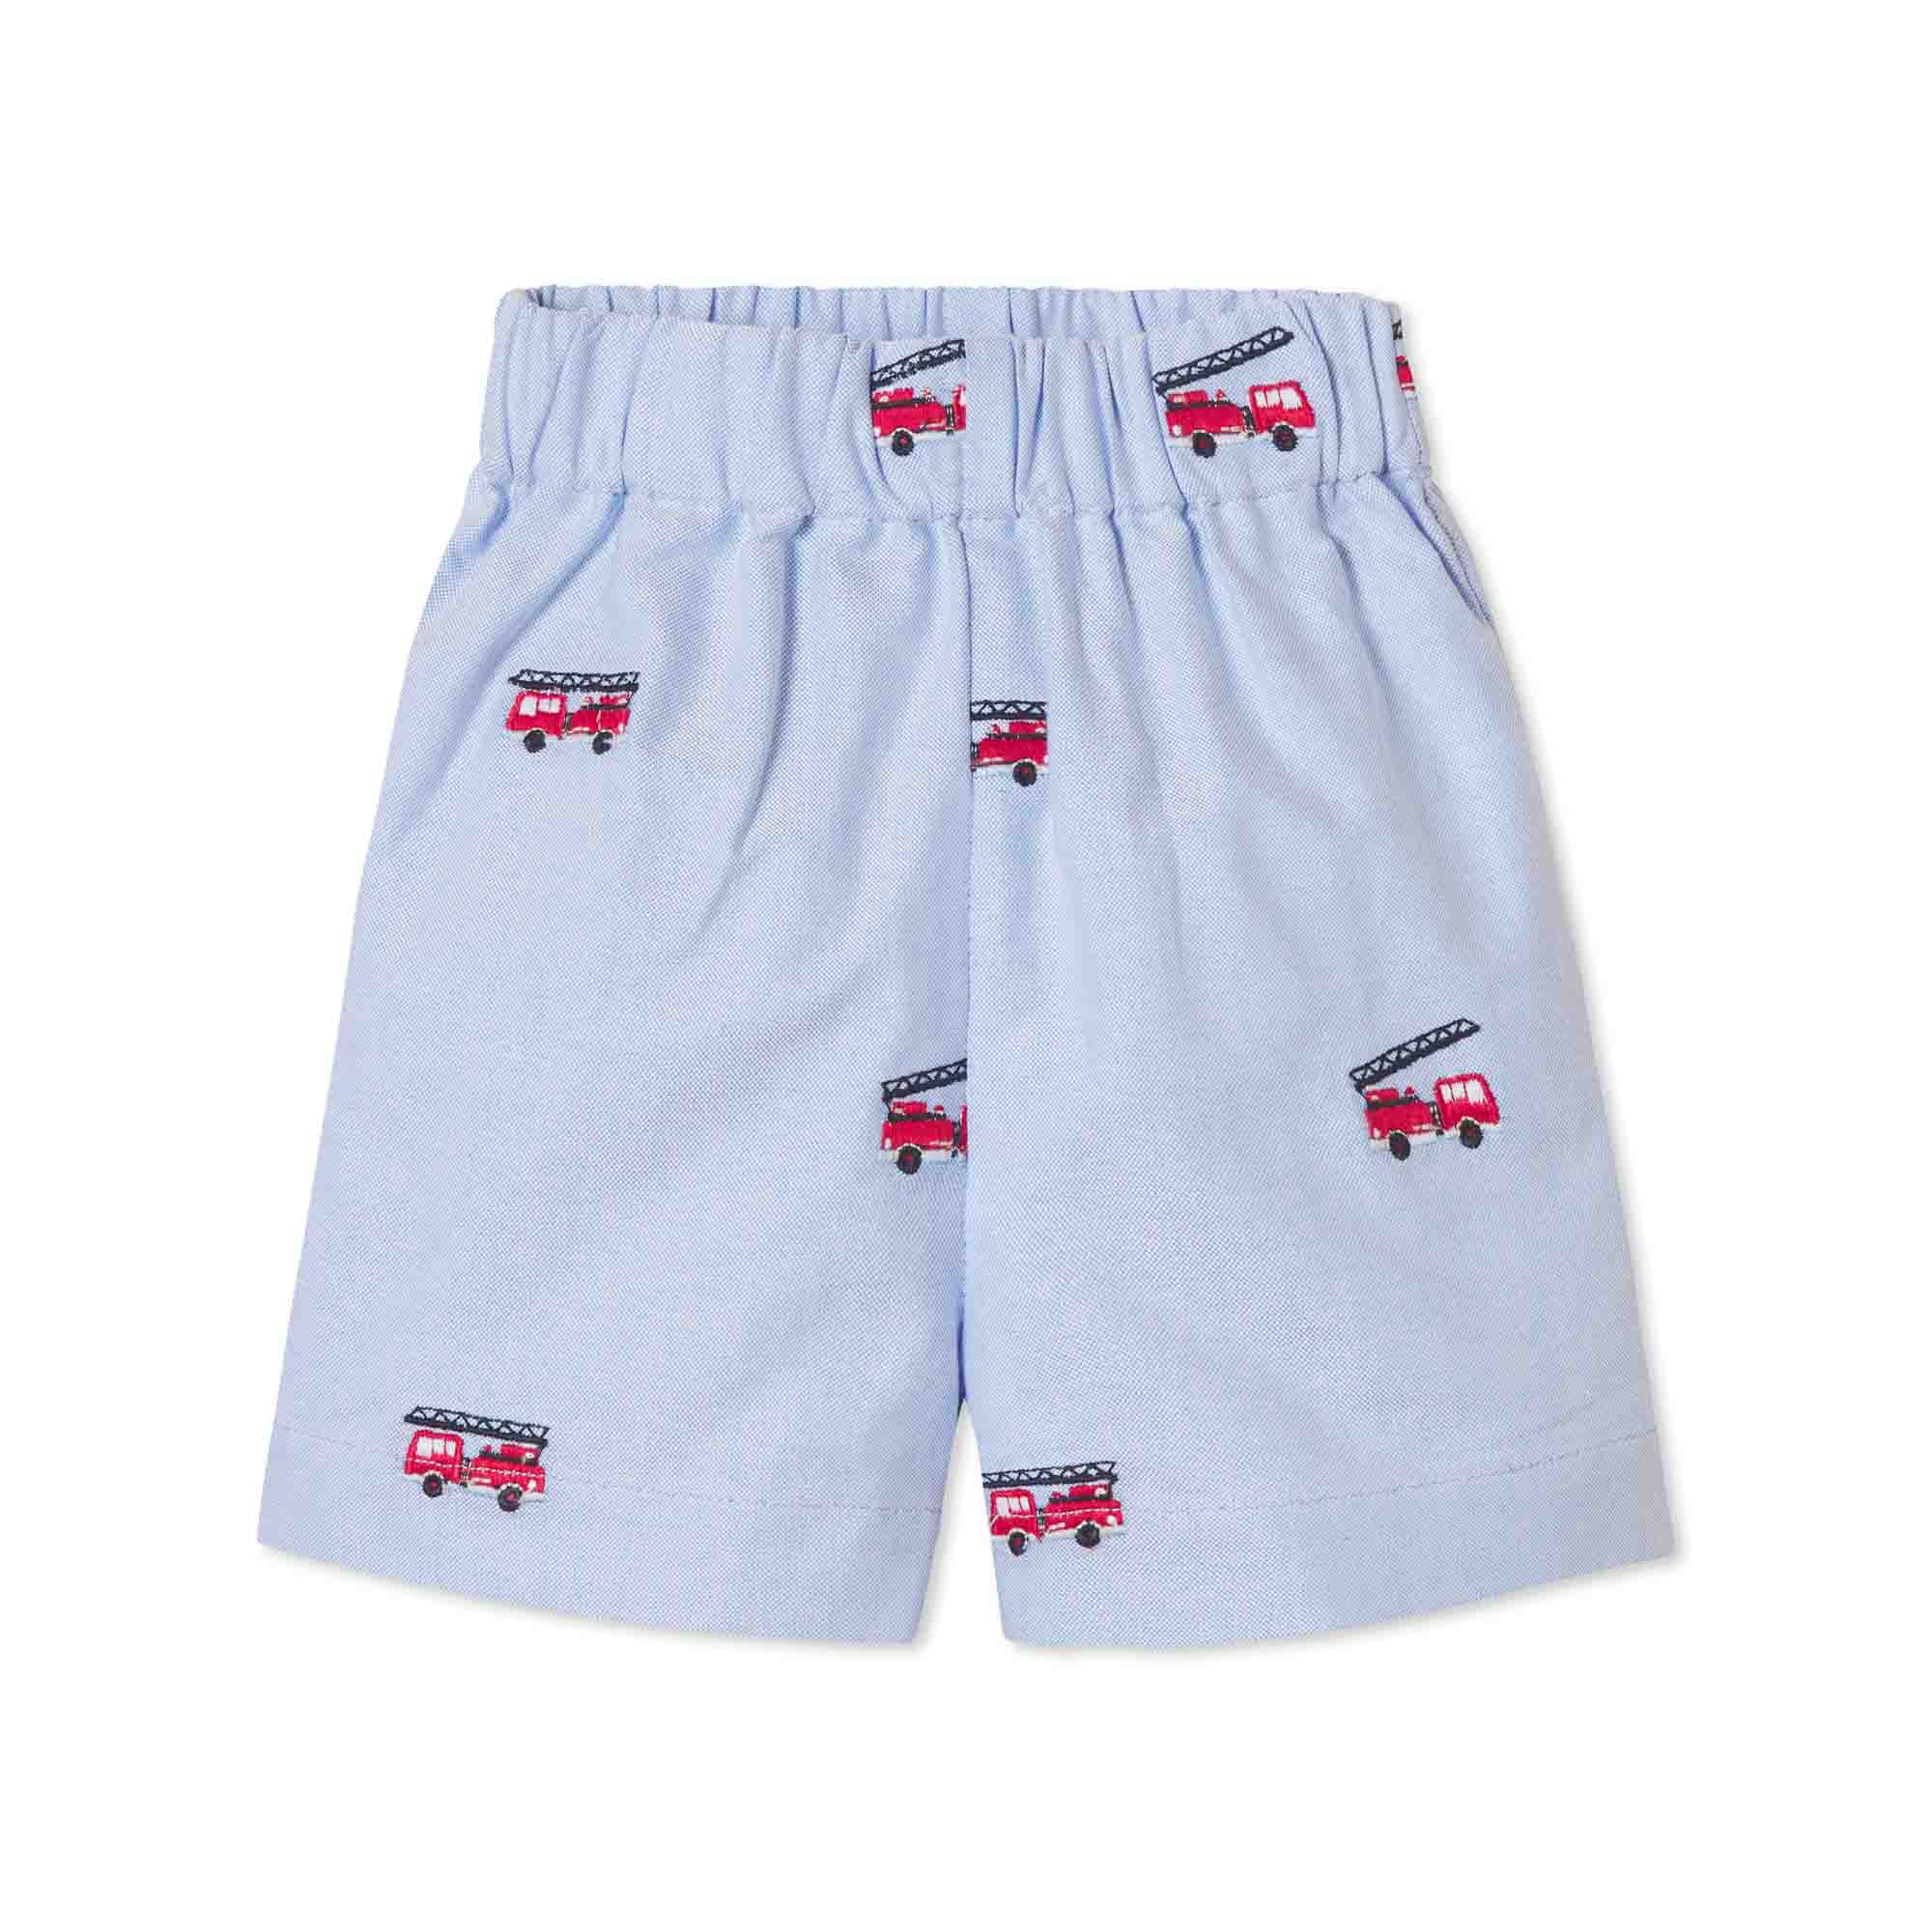 Classic and Preppy Dylan Short, Nantucket Breeze Fire Truck Embroidery-Bottoms-Nantucket Breeze-9-12M-CPC - Classic Prep Childrenswear